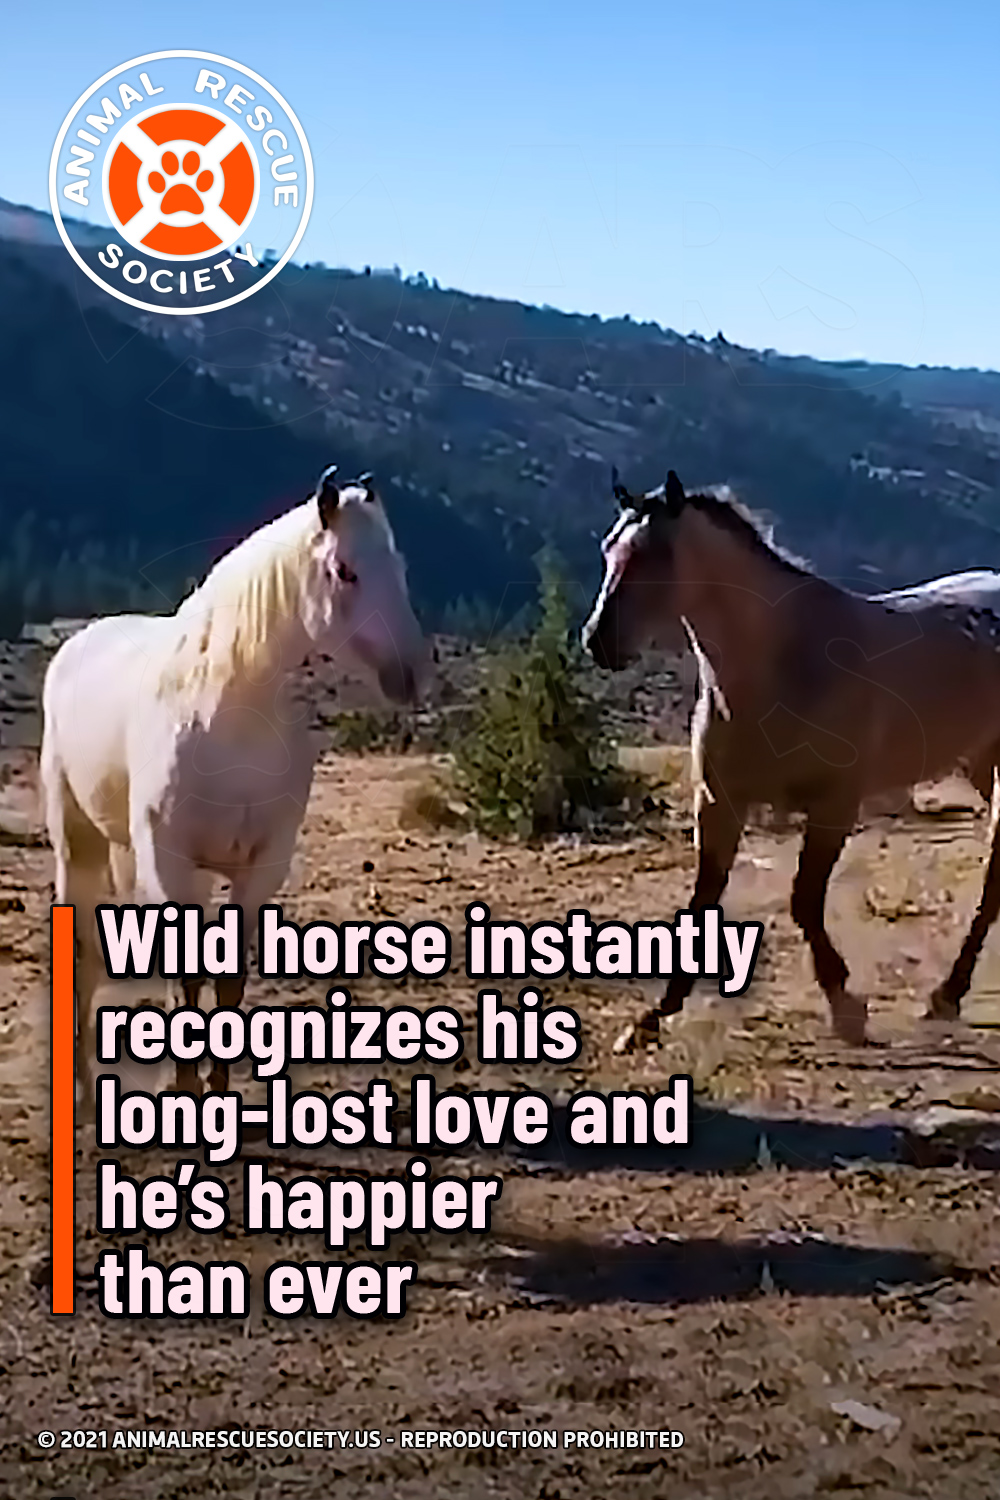 Wild horse instantly recognizes his long-lost love and he’s happier than ever